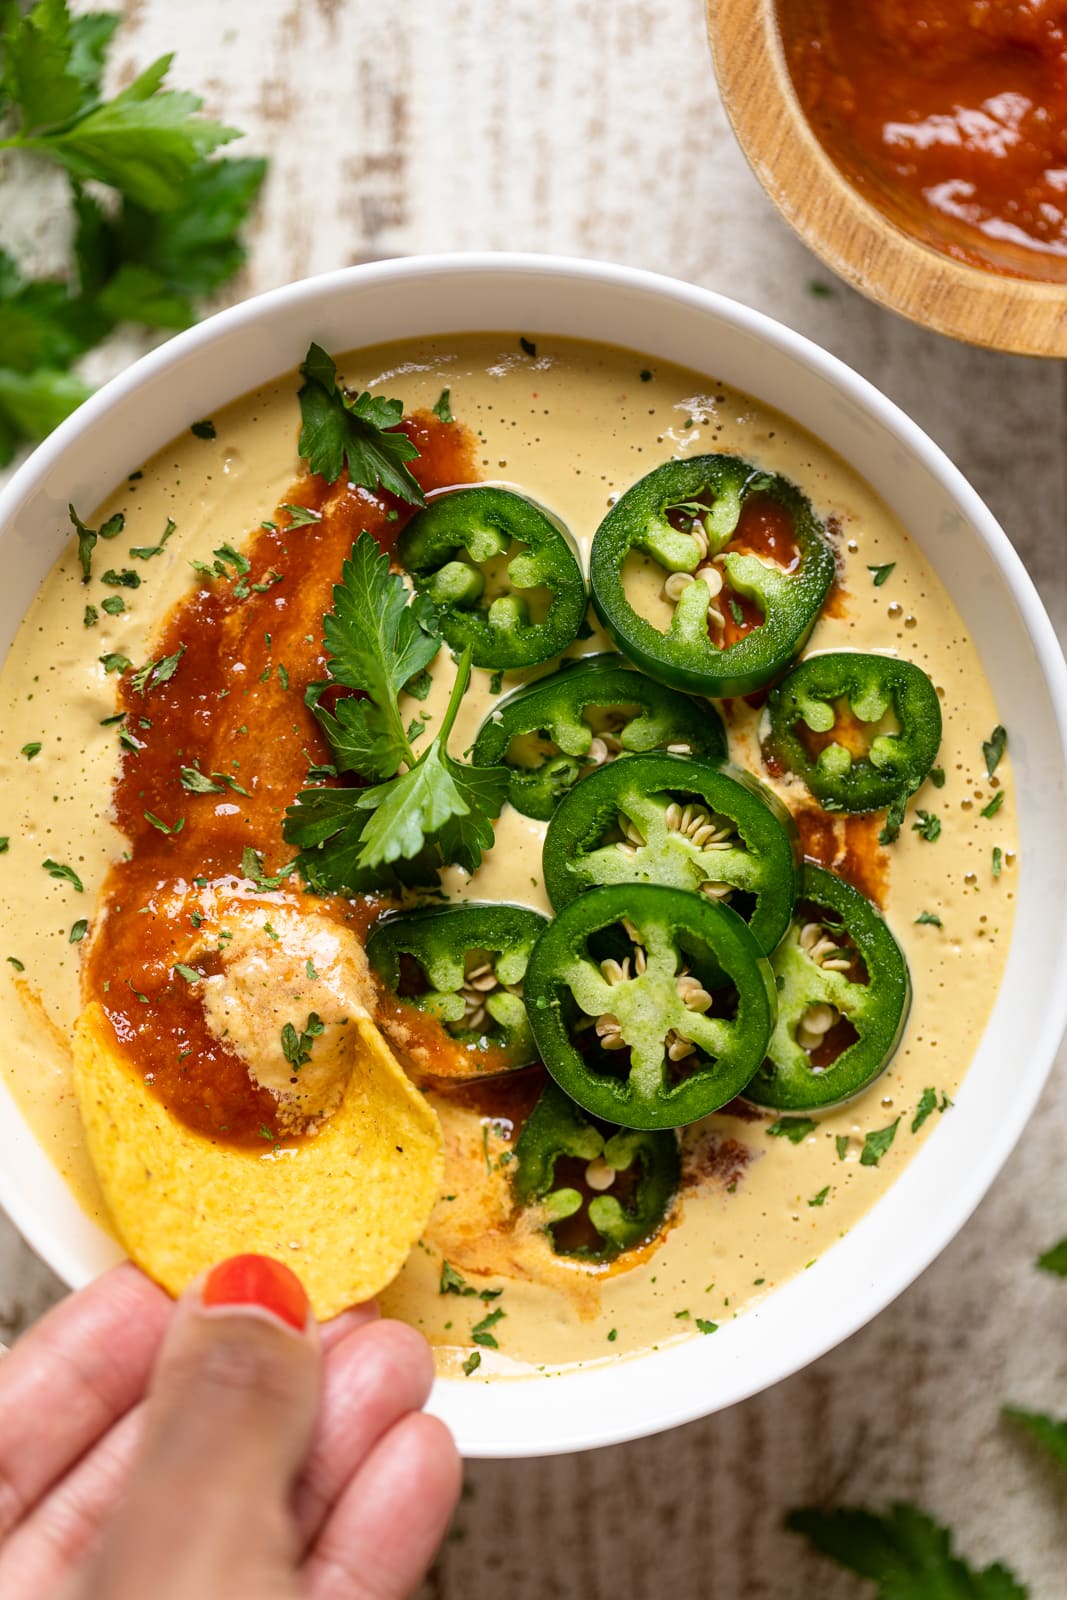 Hand dipping a chip into a bowl of Vegan Jalapeno Queso Dip